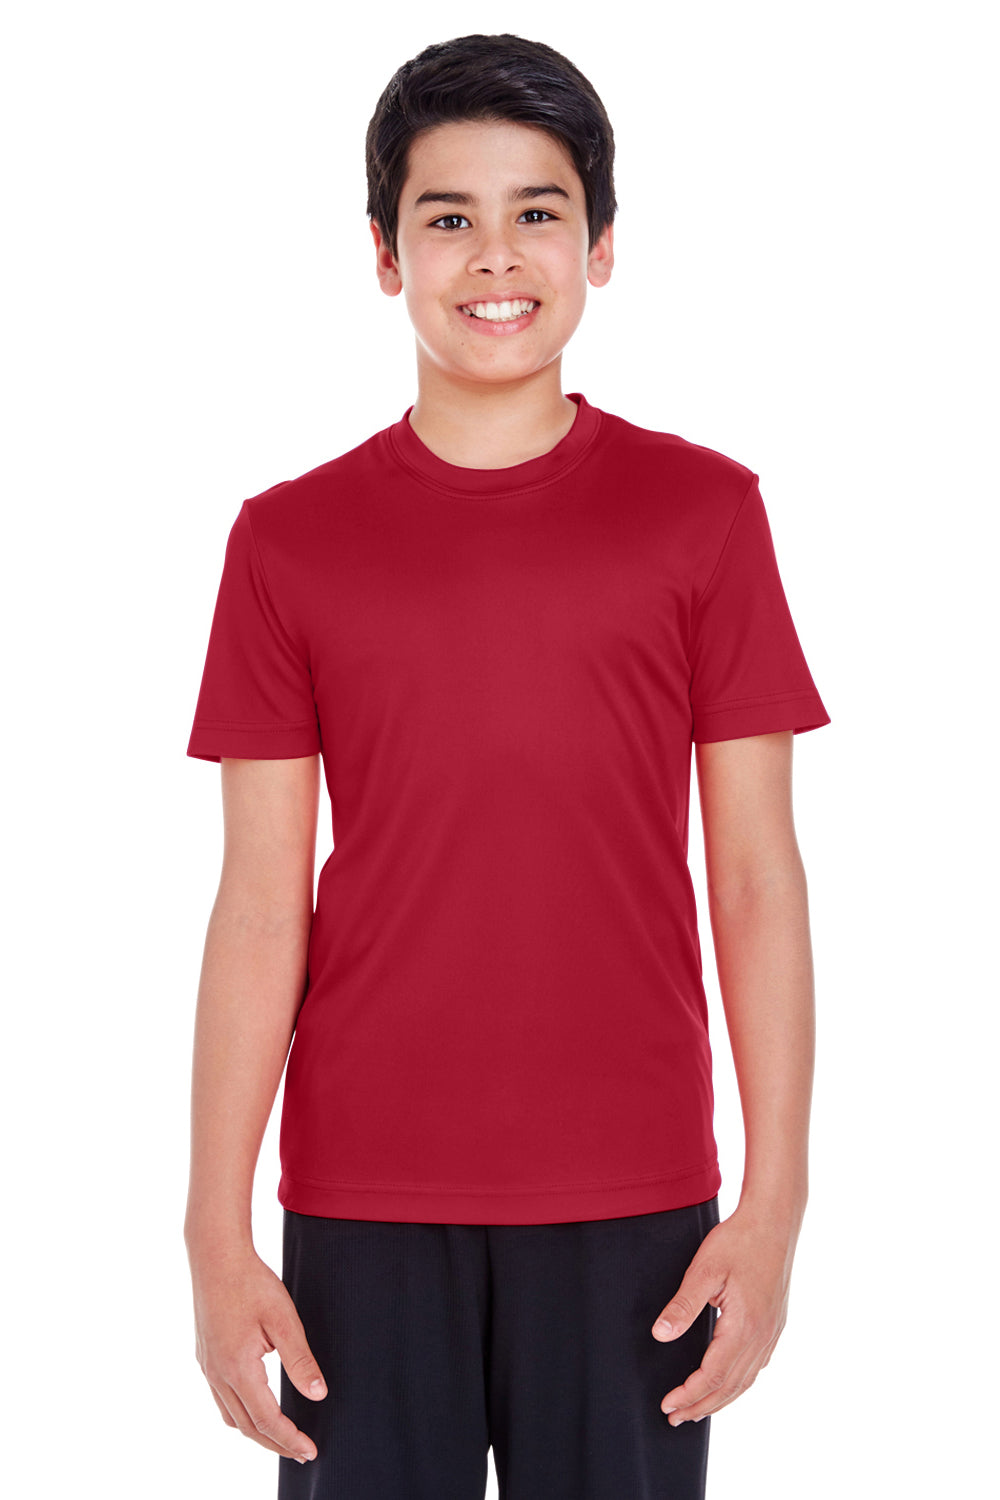 Team 365 TT11Y Youth Zone Performance Moisture Wicking Short Sleeve Crewneck T-Shirt Scarlet Red Front